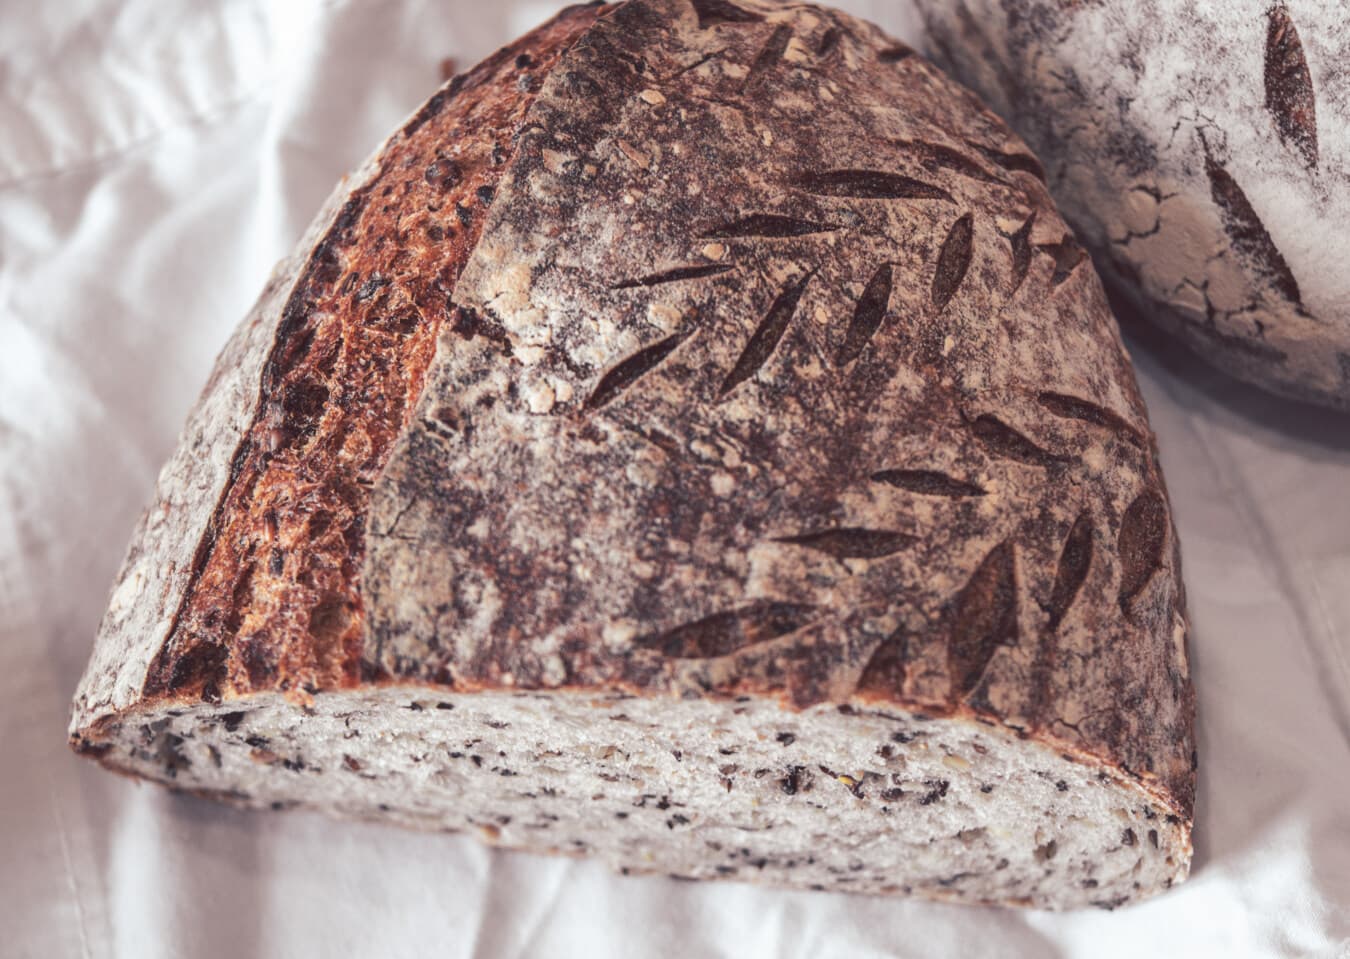 organic, wholemeal bread, rye, wheat, wholemeal flour, bread, food, flour, baking, upclose